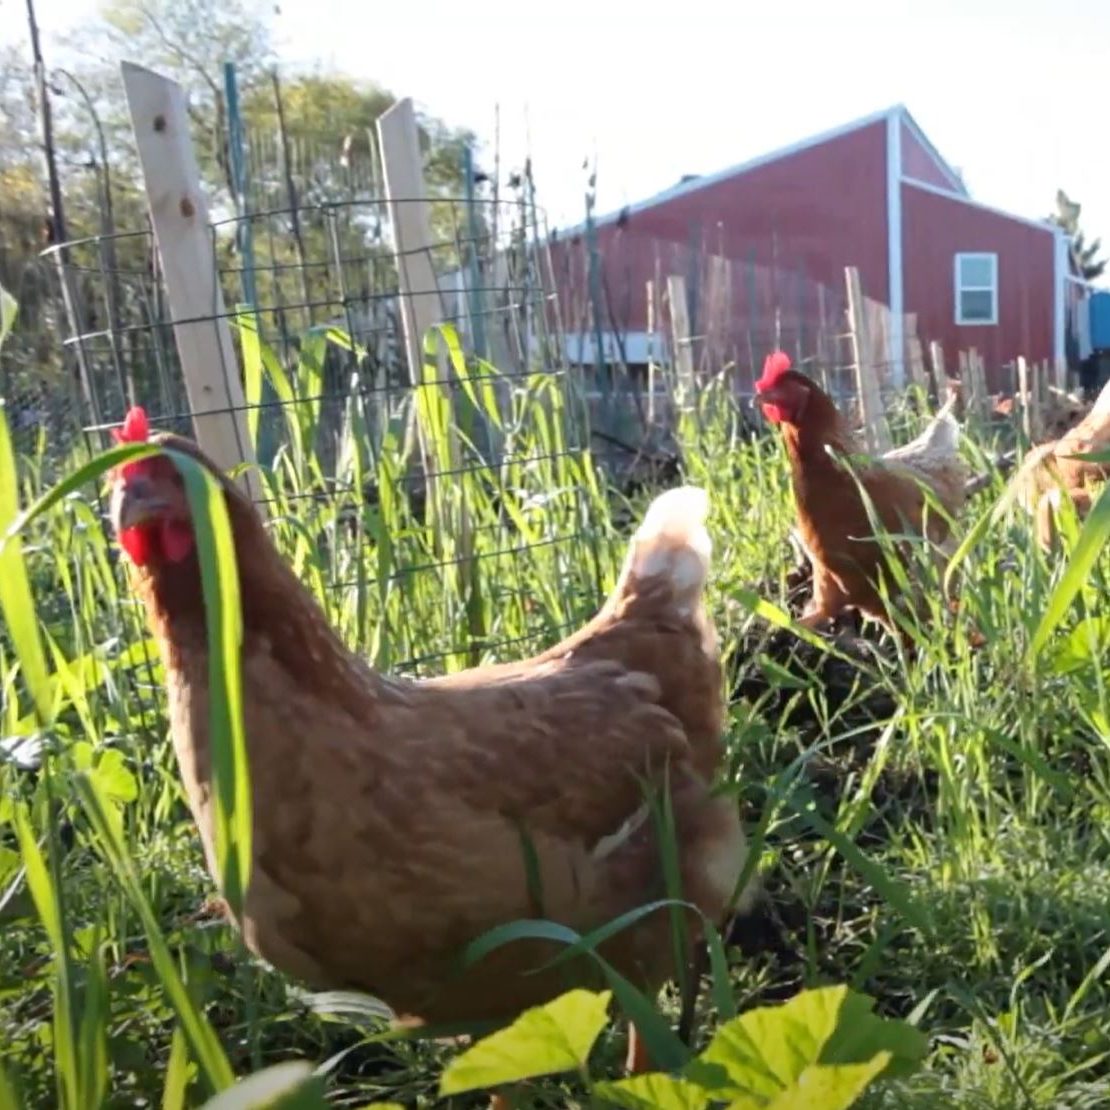 Sustainable Food Farm, Chickens in a Grassy Field